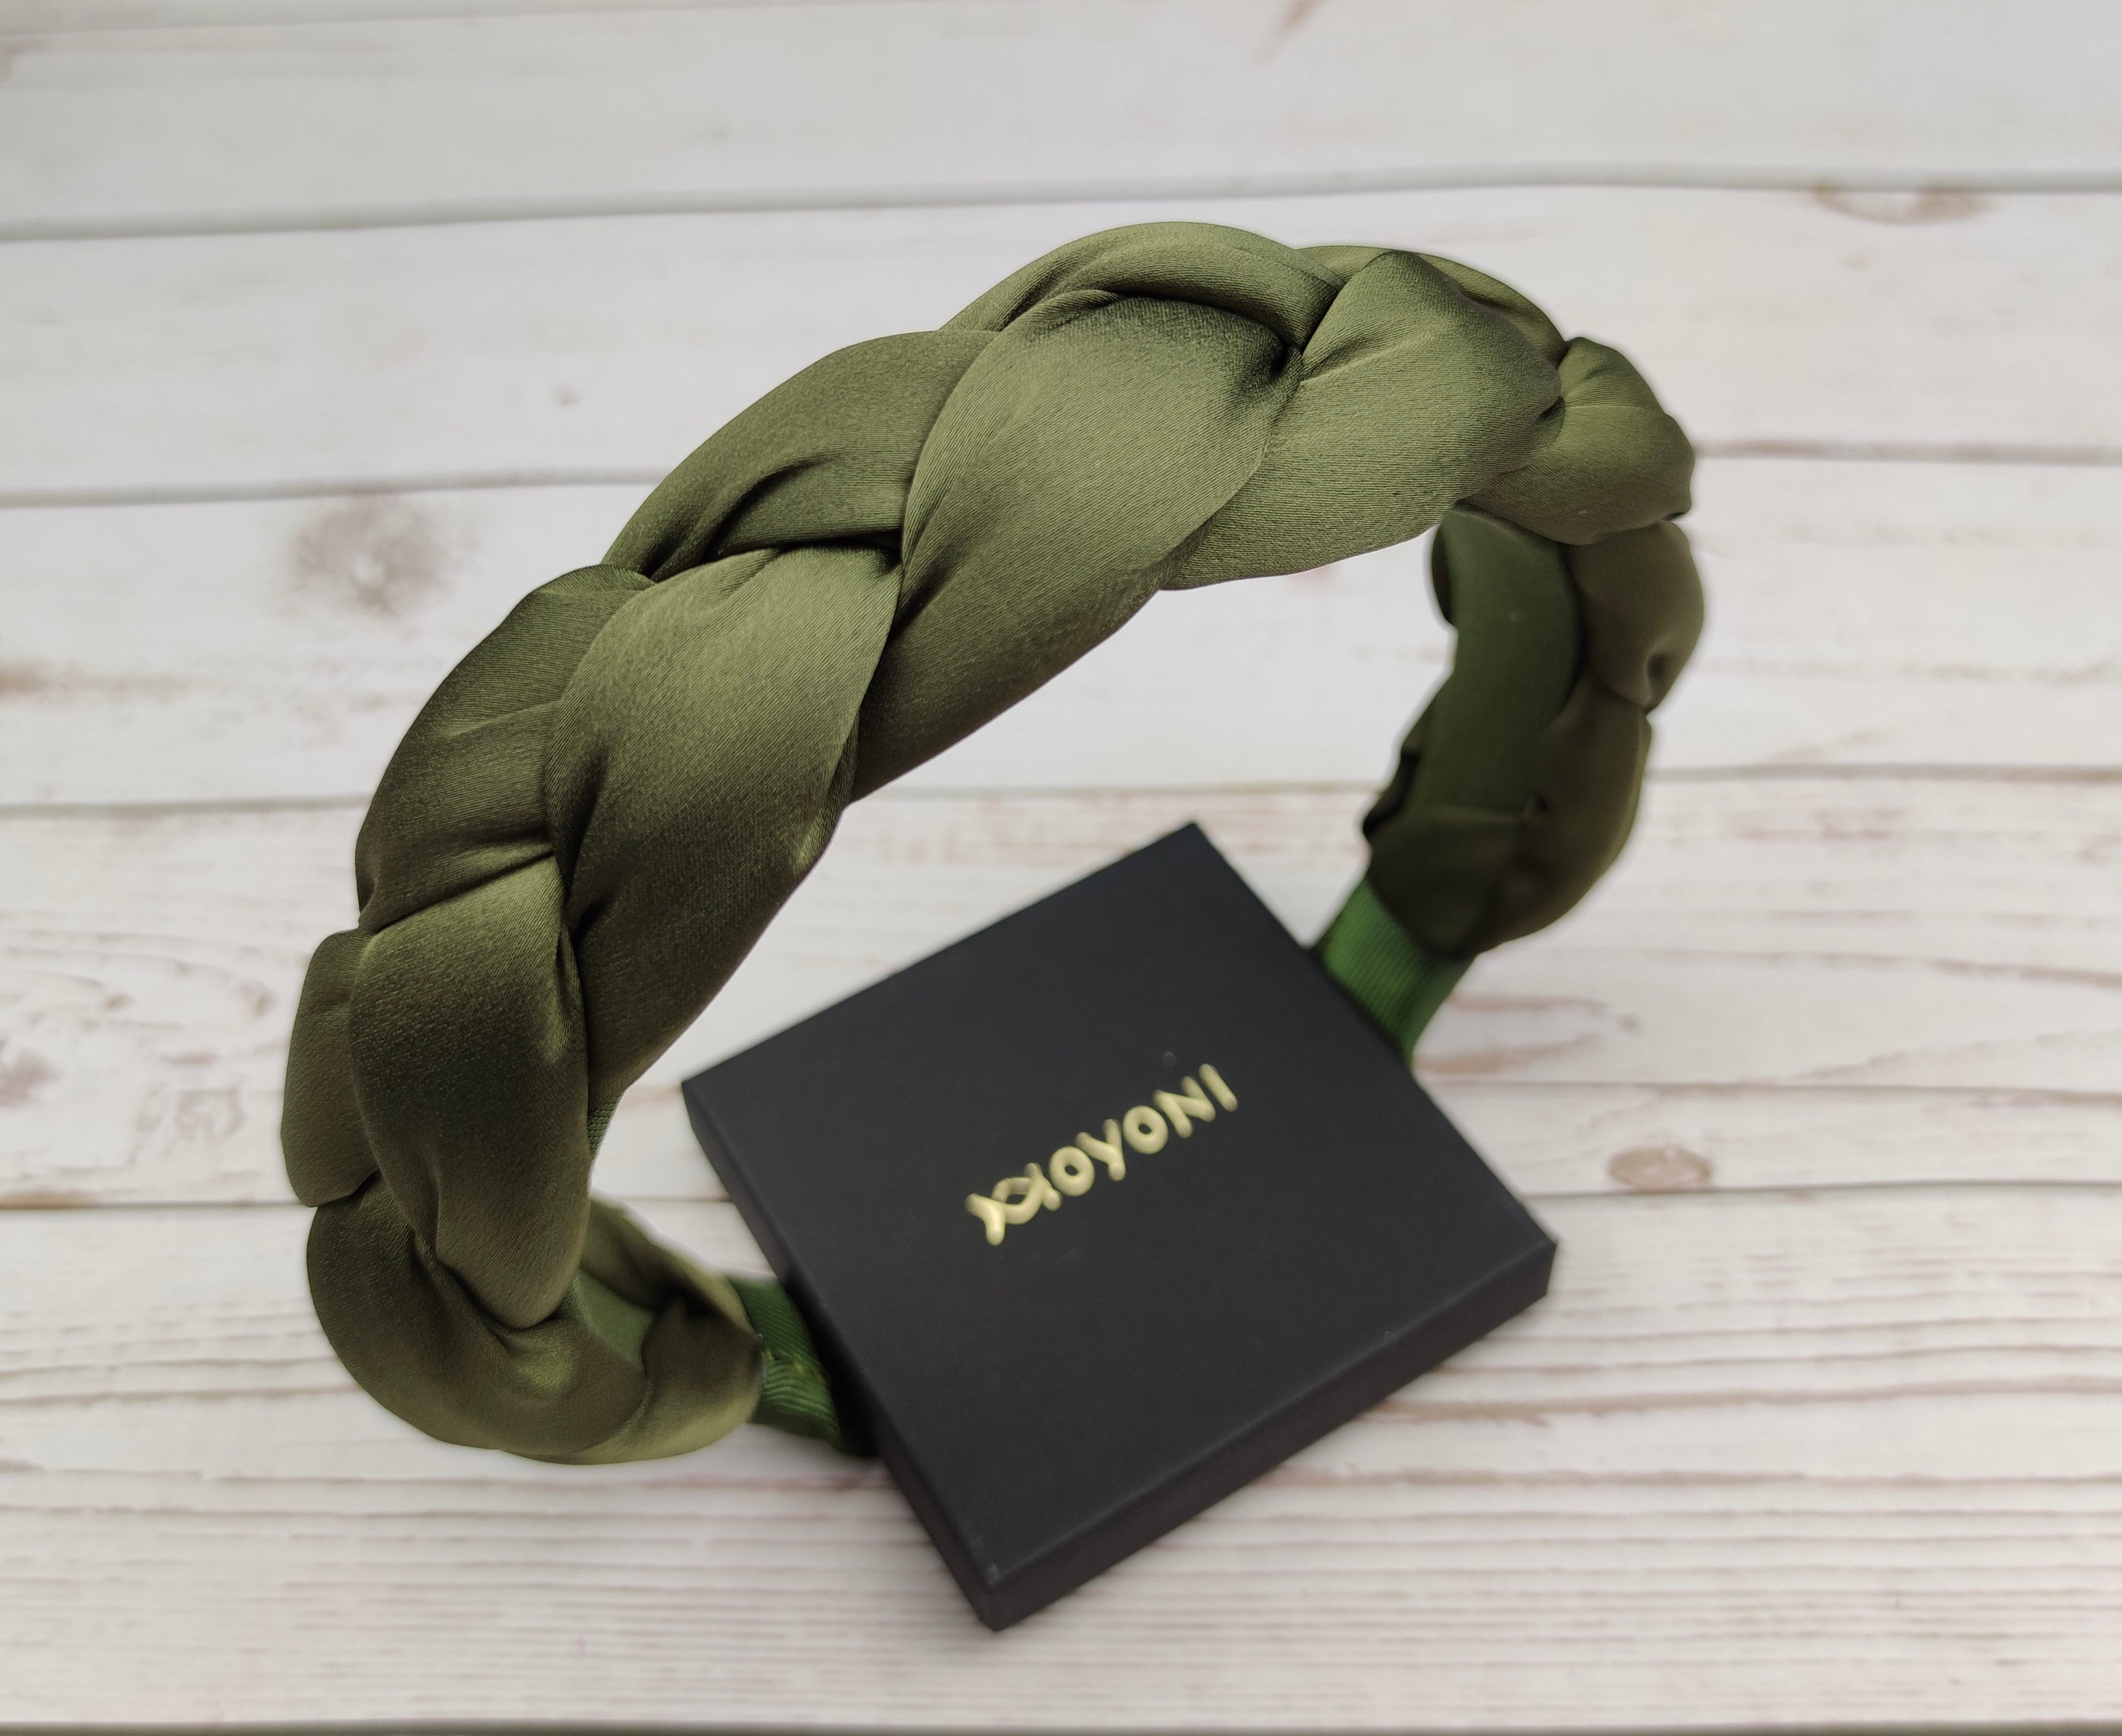 Make a statement with this fashionable and versatile pea-green knotted turban headband for women.